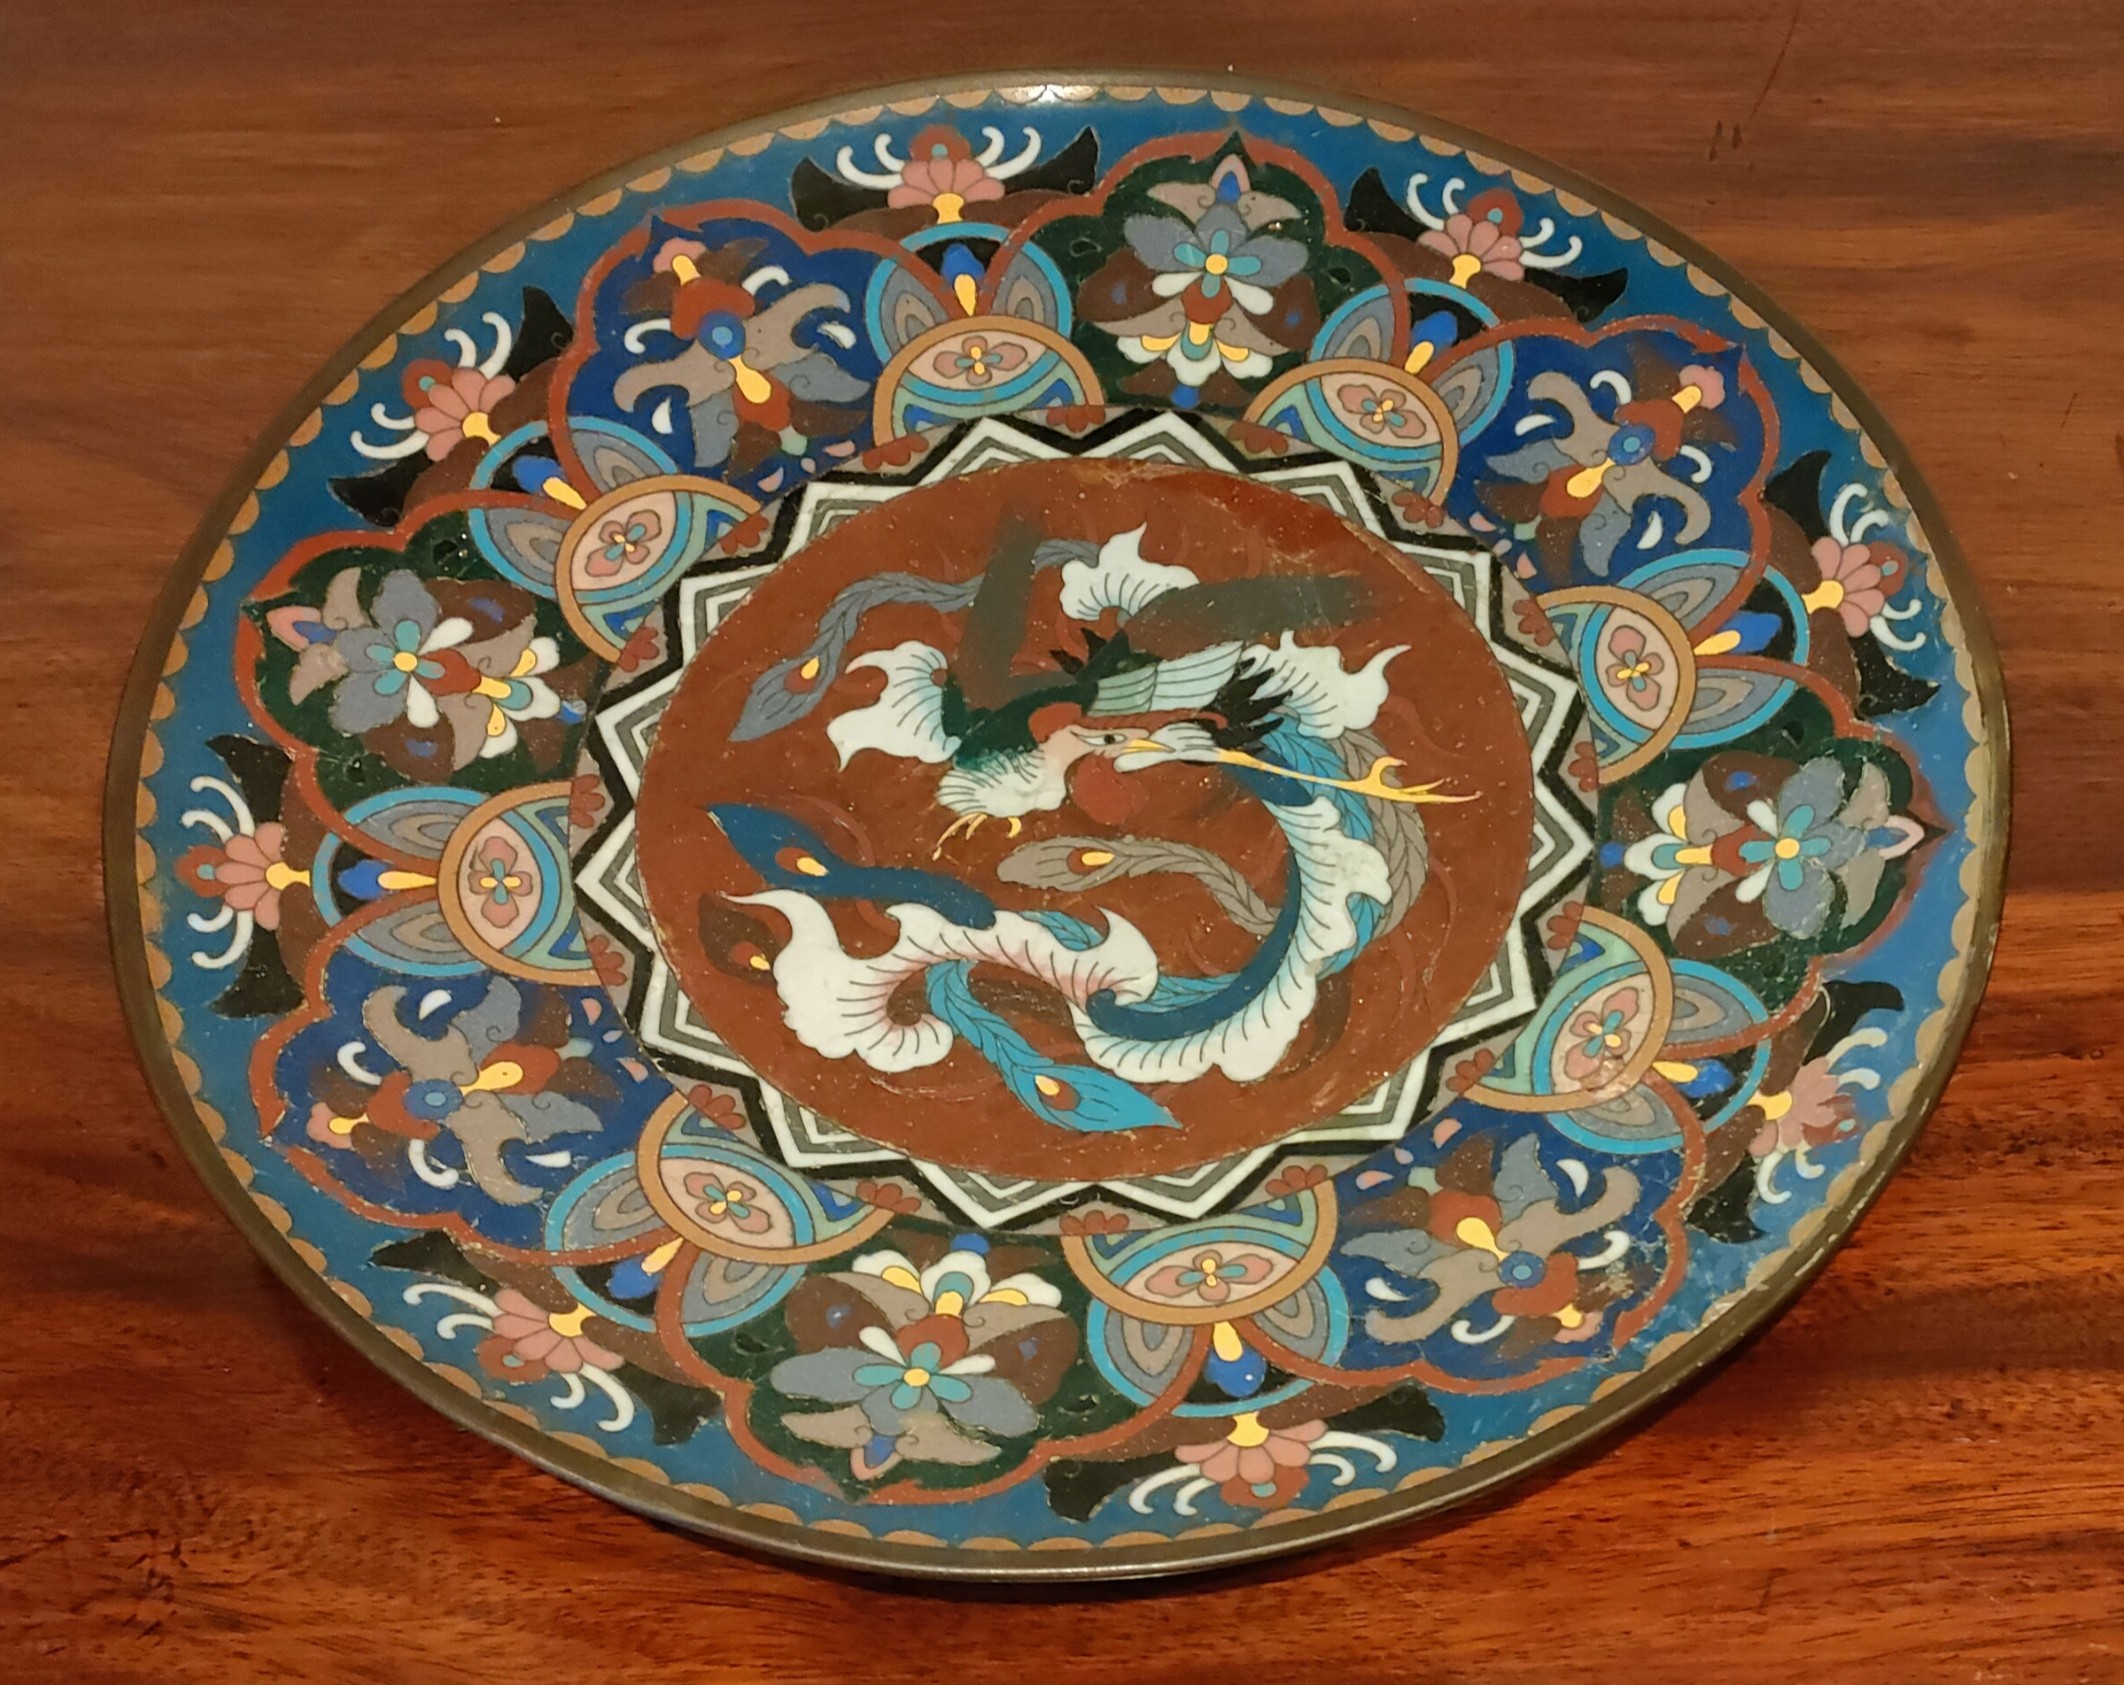 ORIENTAL CLOISONNE GLAZED CIRCULAR PLAQUE DECORATED WITH BIRDS AND FOLIAGE, DIAMETER APPROXIMATELY